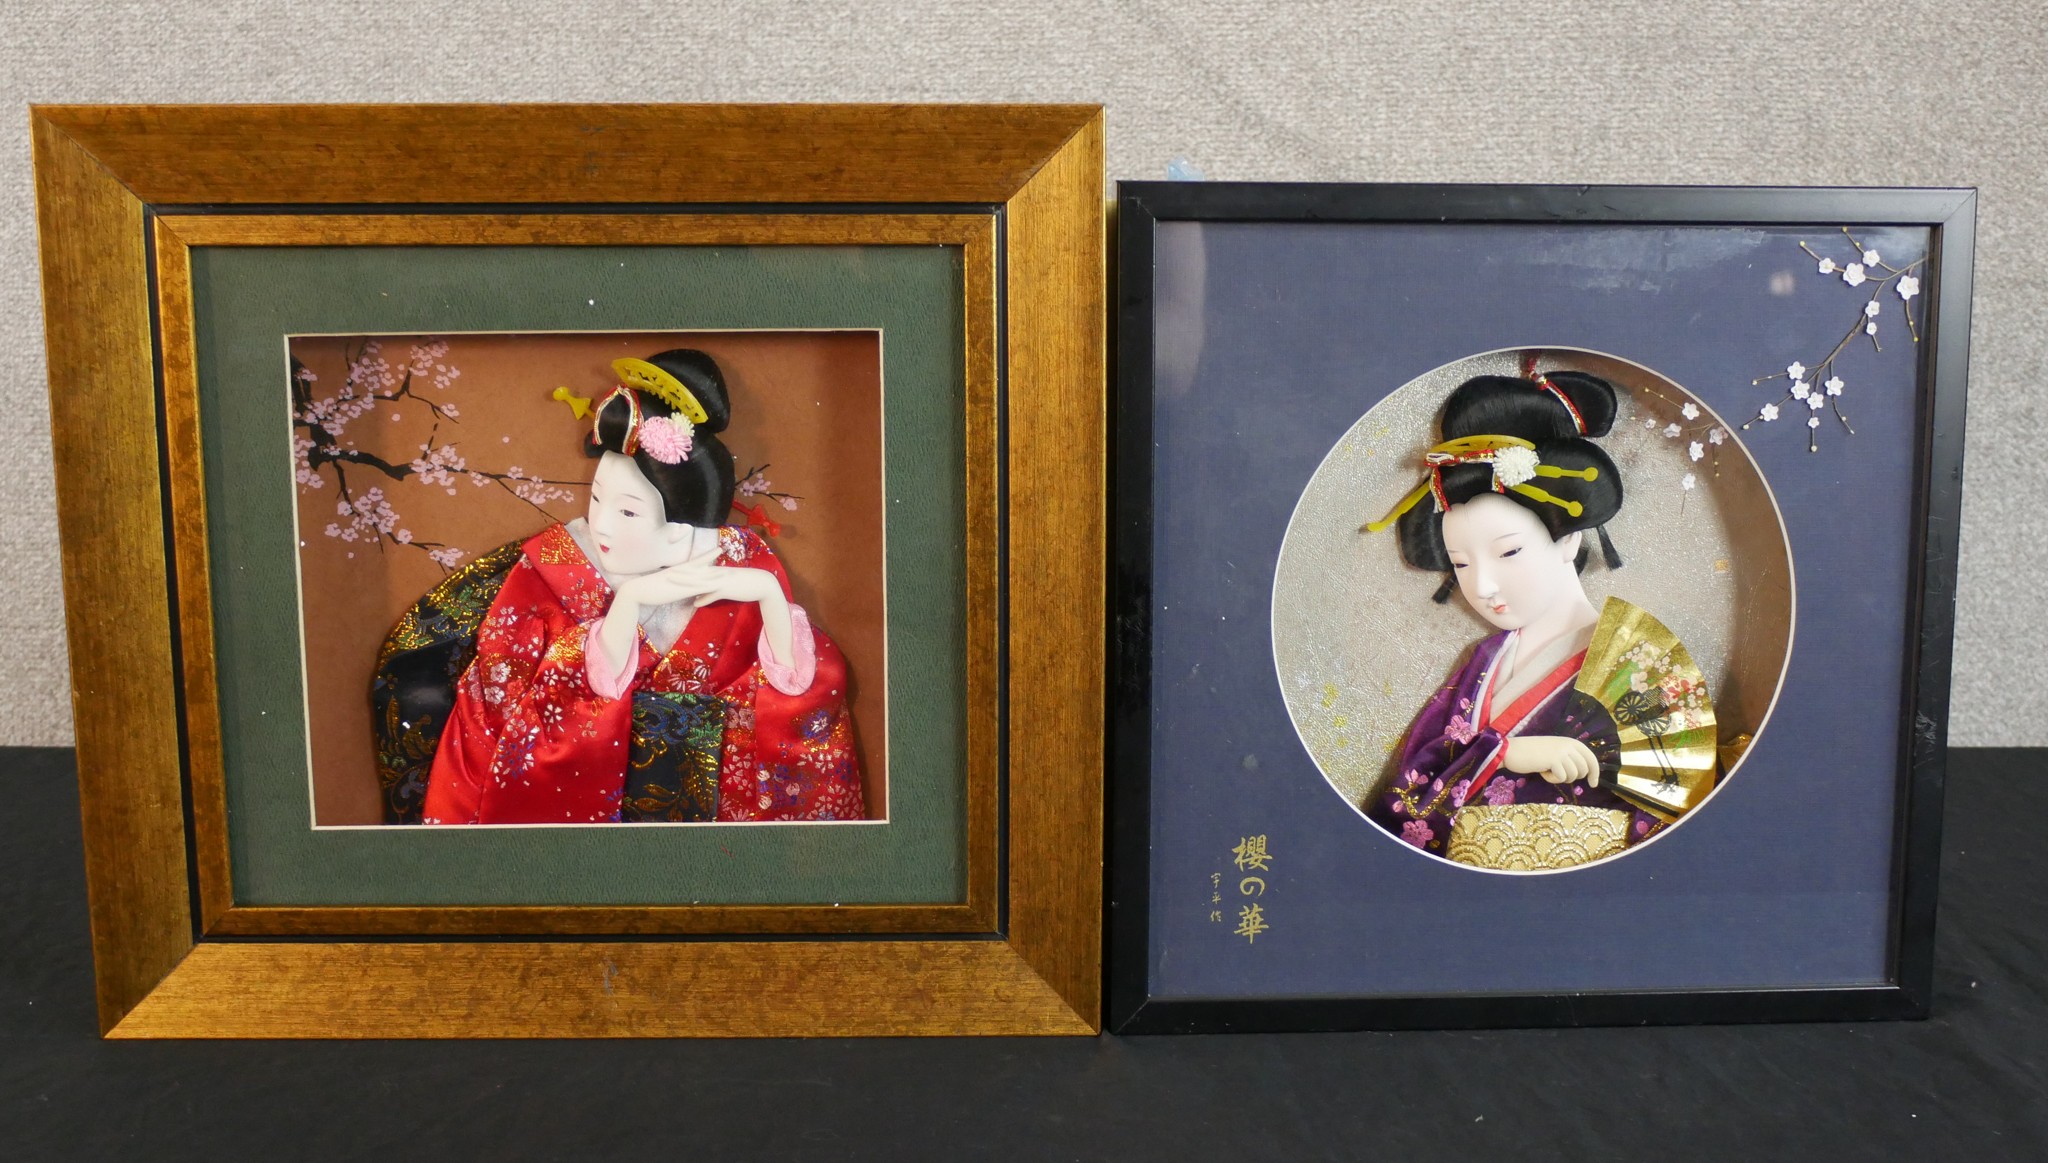 Two highly detailed Japanese geisha models in traditional dress housed in wooden frames. The largest